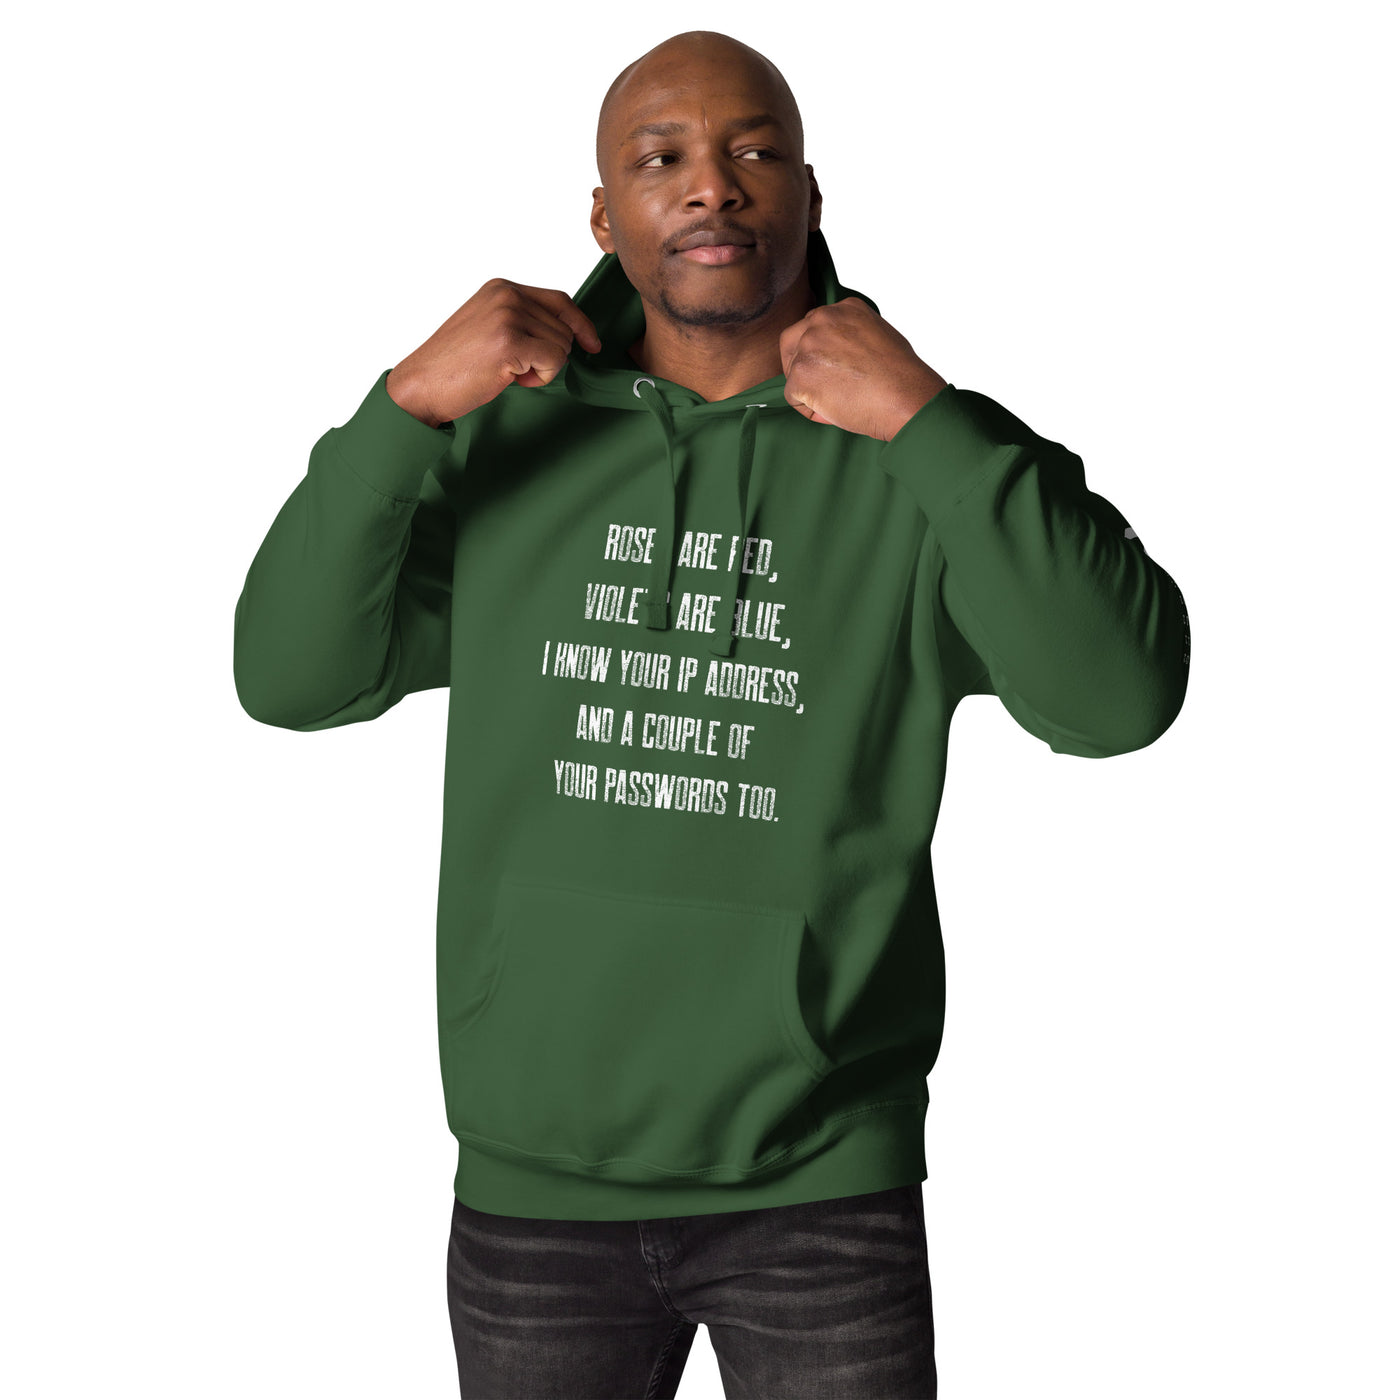 Roses are red, I know your IP and Passwords - Unisex Hoodie